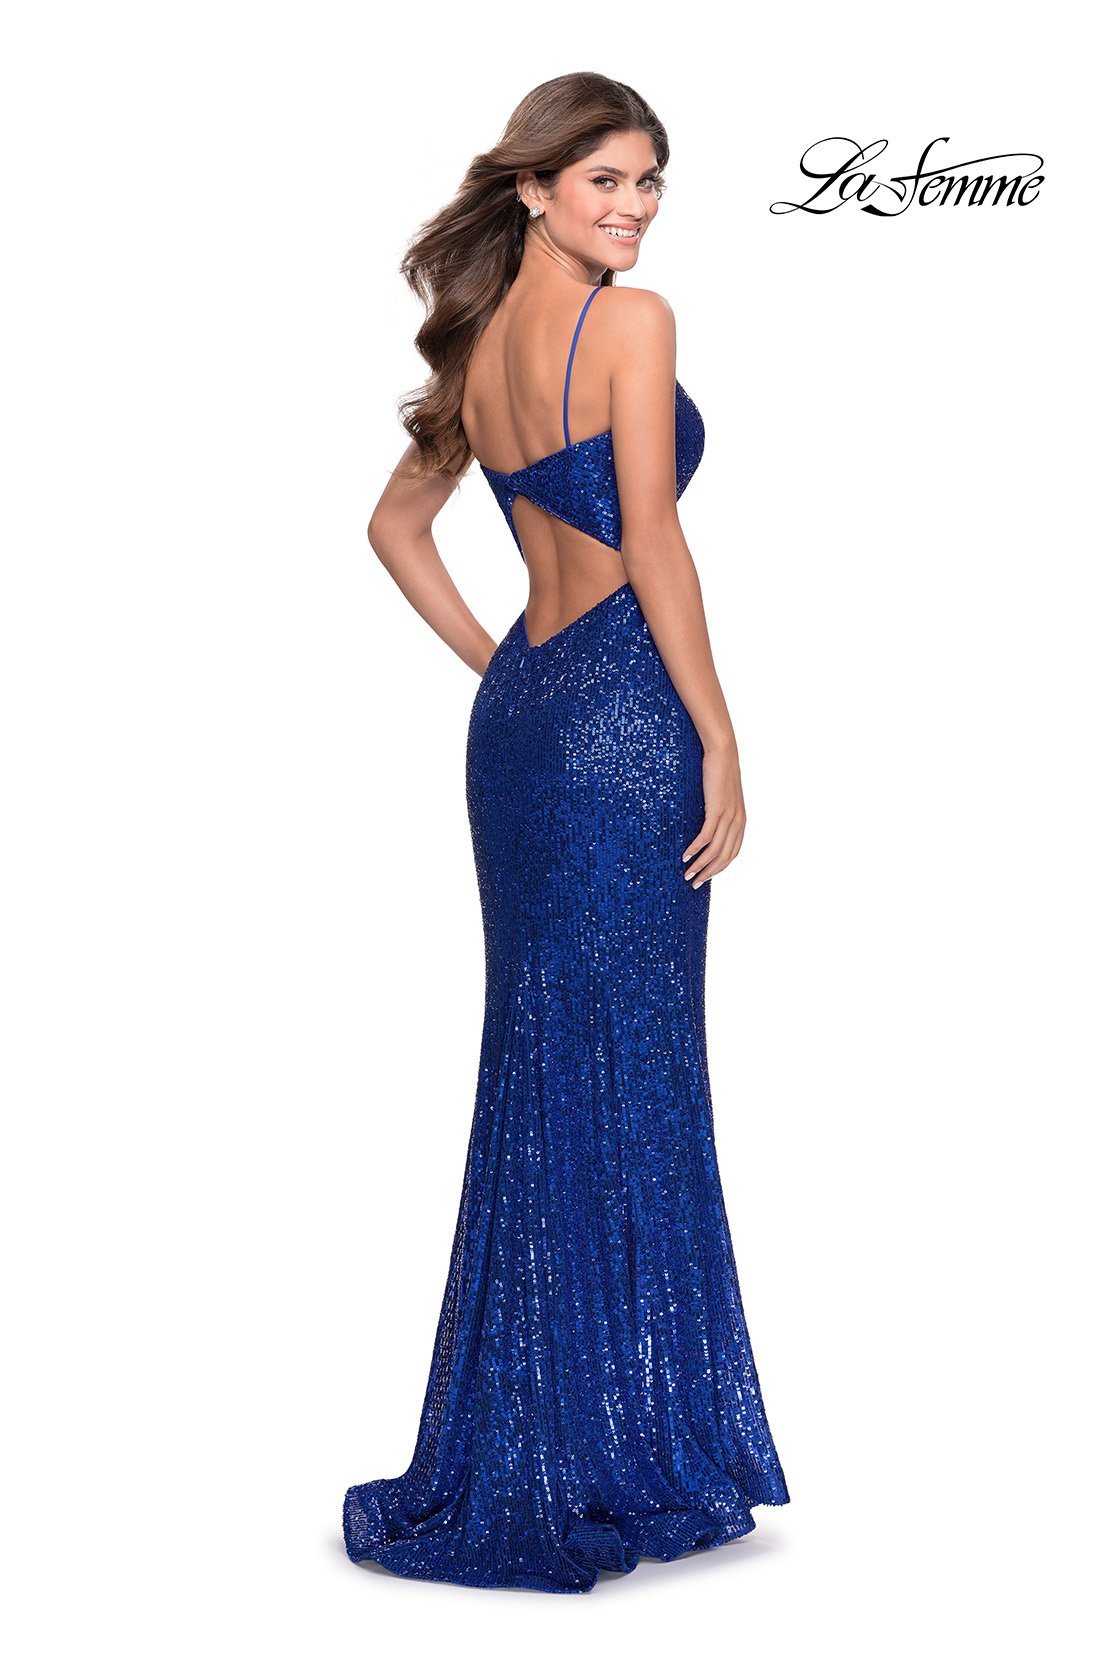 La Femme 28539 dress images in these colors: Champagne, Emerald, Red, Royal Blue.